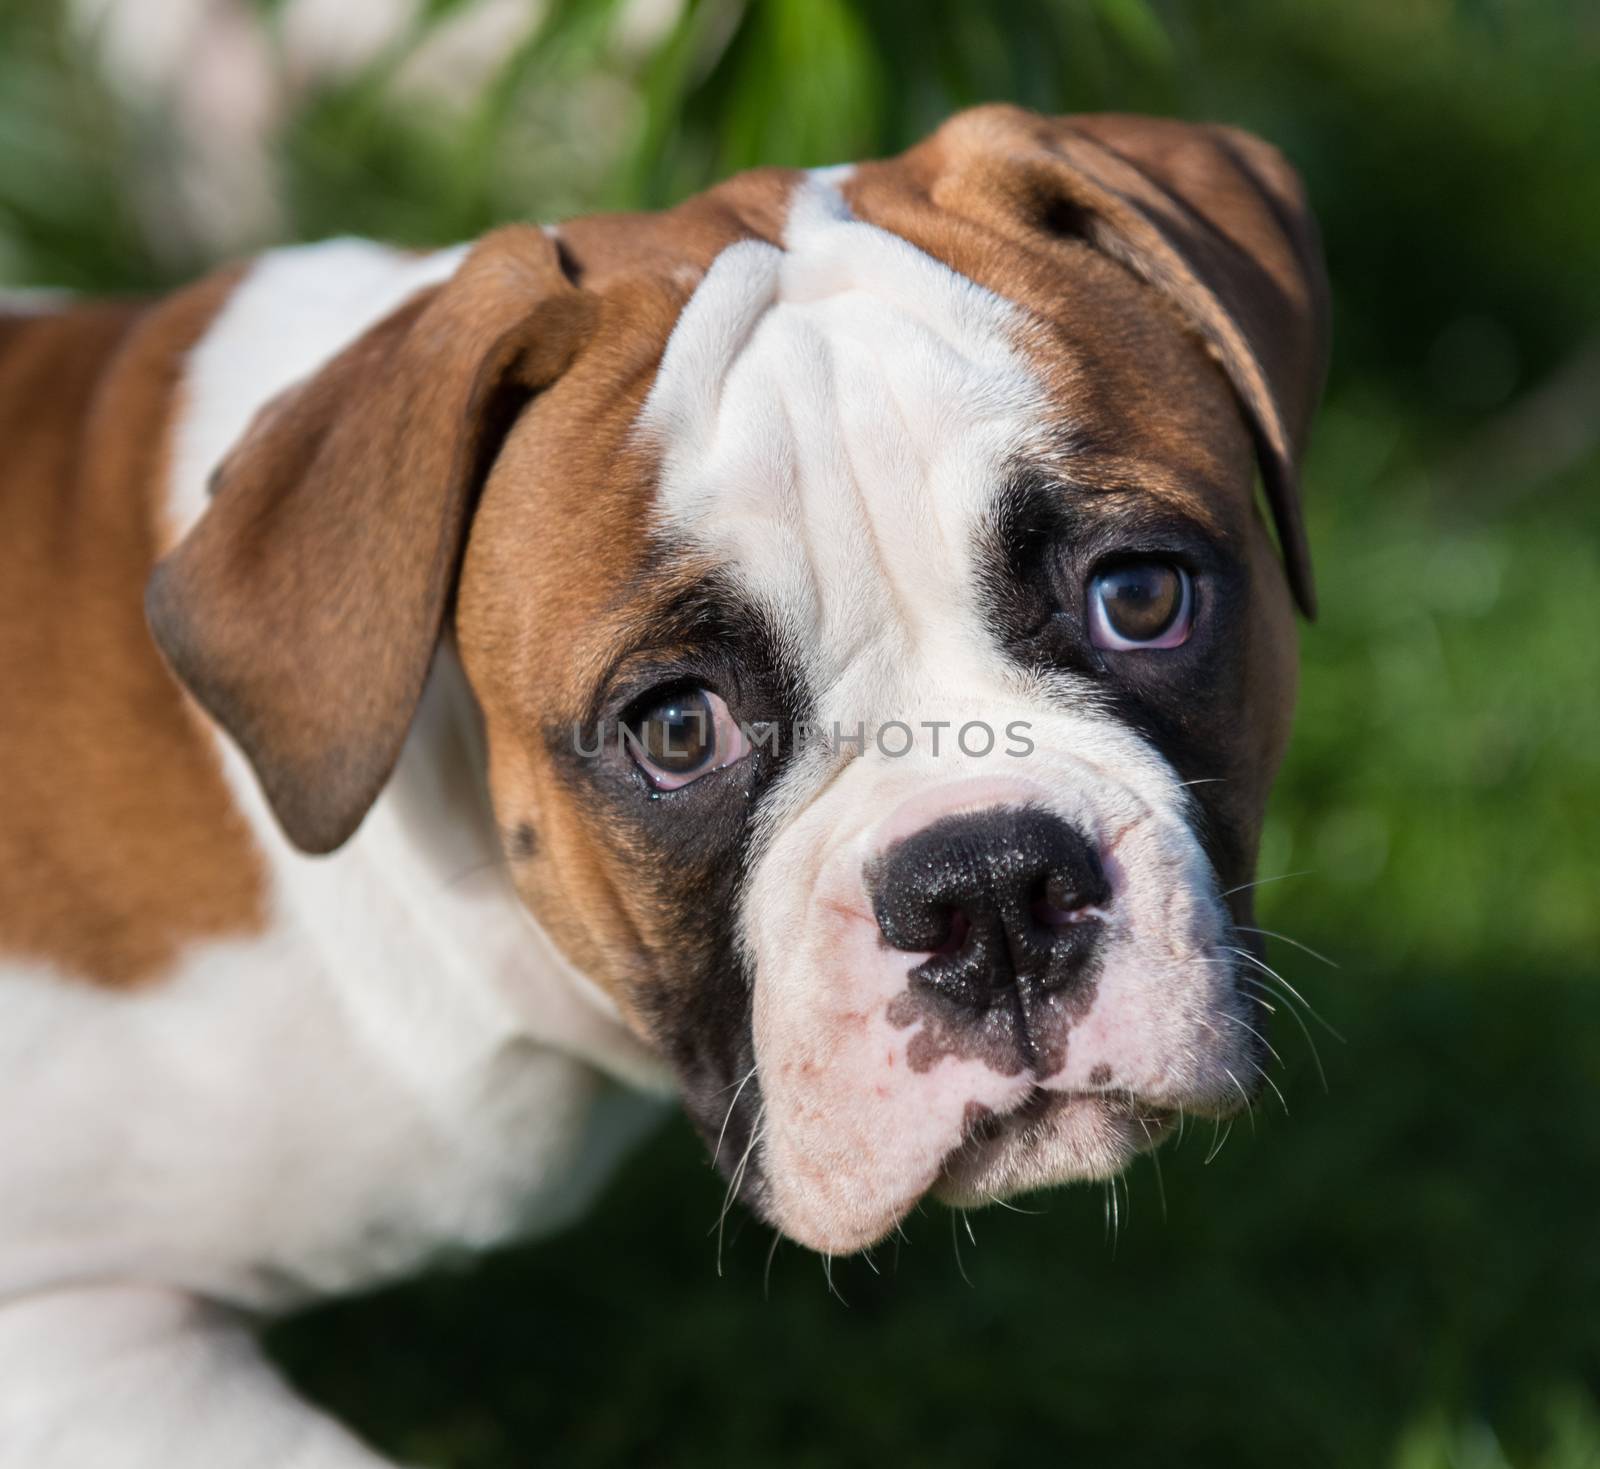 American Bulldog puppy on nature by infinityyy